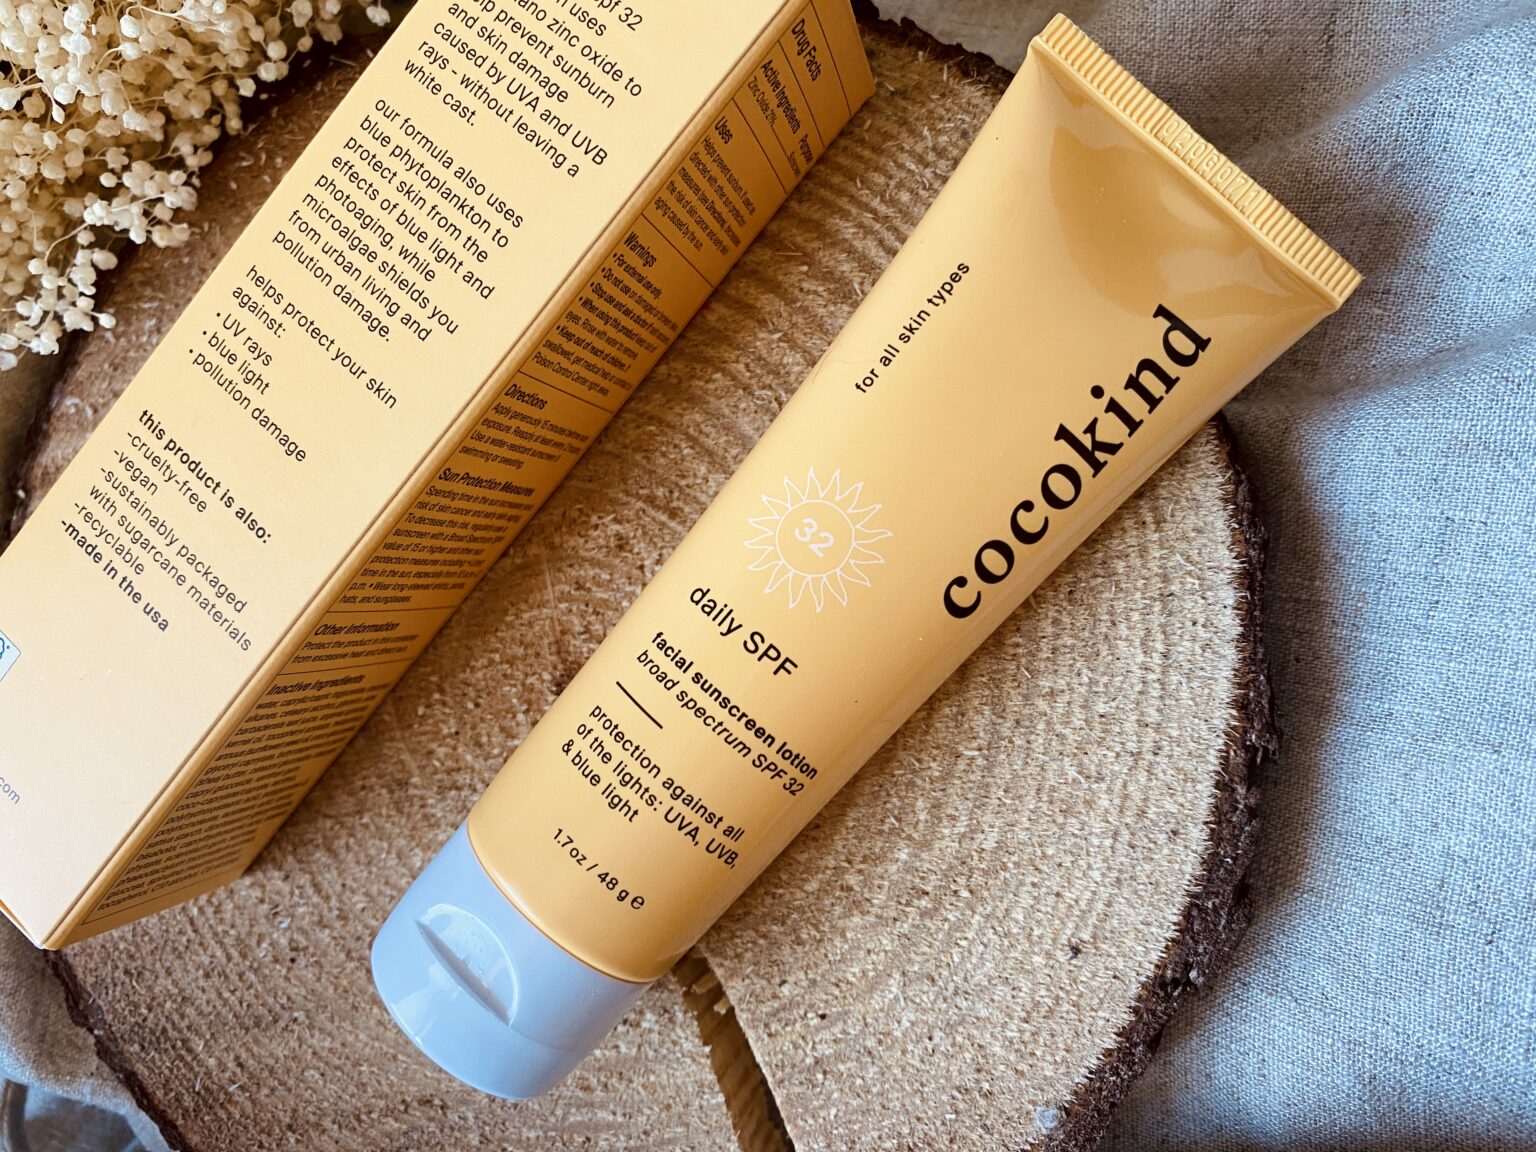 Cocokind sunscreen